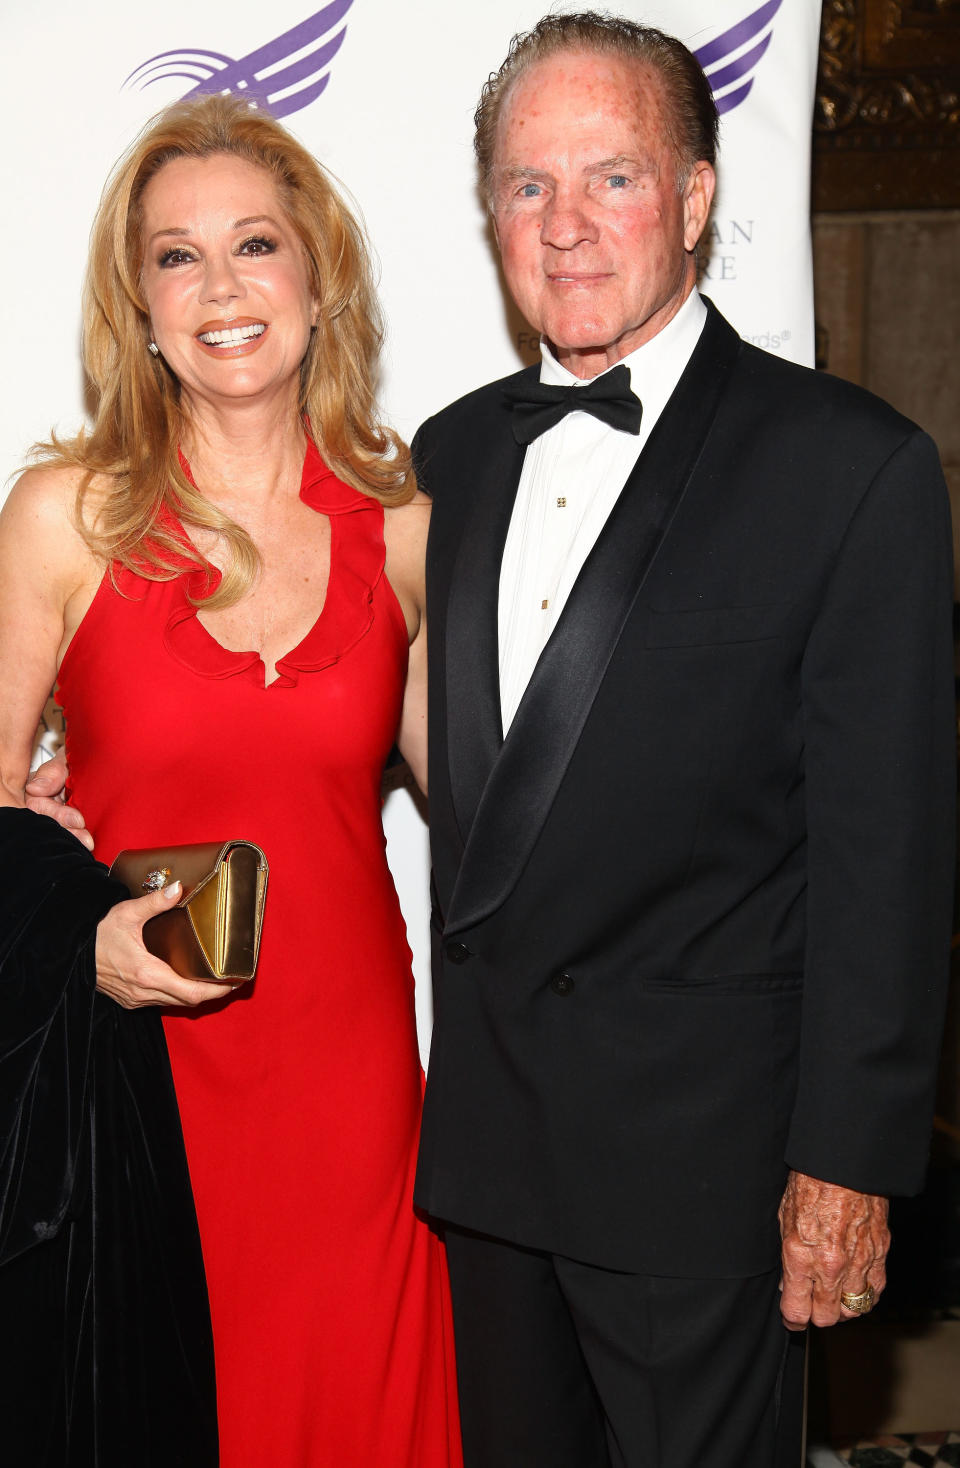 NEW YORK - JUNE 01:  (L-R) Actress Kathie Lee Gifford and Frank Gifford attend the American Theatre Wing's 2009 Spring Gala at Cipriani 42nd Street on June 1, 2009 in New York City.  (Photo by Astrid Stawiarz/Getty Images)